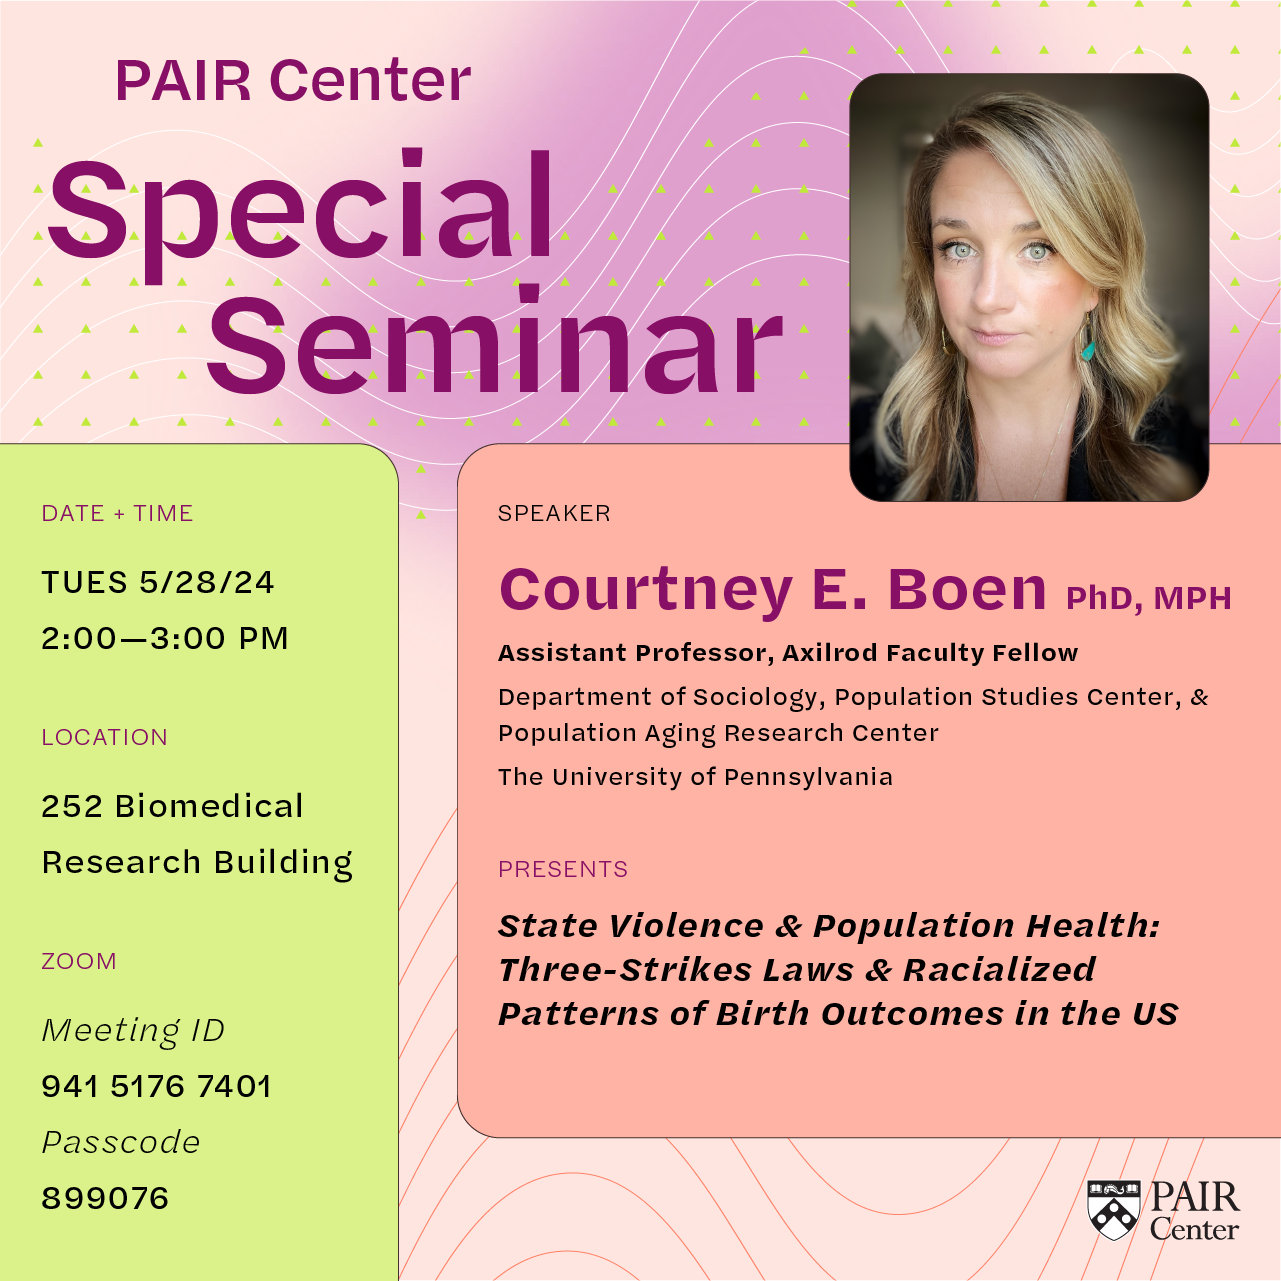 Flyer with headshot of Courtney Boen, and text that reads: "PAIR Center Special Seminar. Speaker Courtney E. Boen, PhD, MPH Presents State Violence & Population Health: Three-Strikes Laws & Racialized Patterns of Birth Outcomes in the US. Tues, 5/28/24, 2:00-3:00 PM. 252 Biomedical Research Building. Zoom Meeting ID: 941 5176 7401 Passcode: 899076."